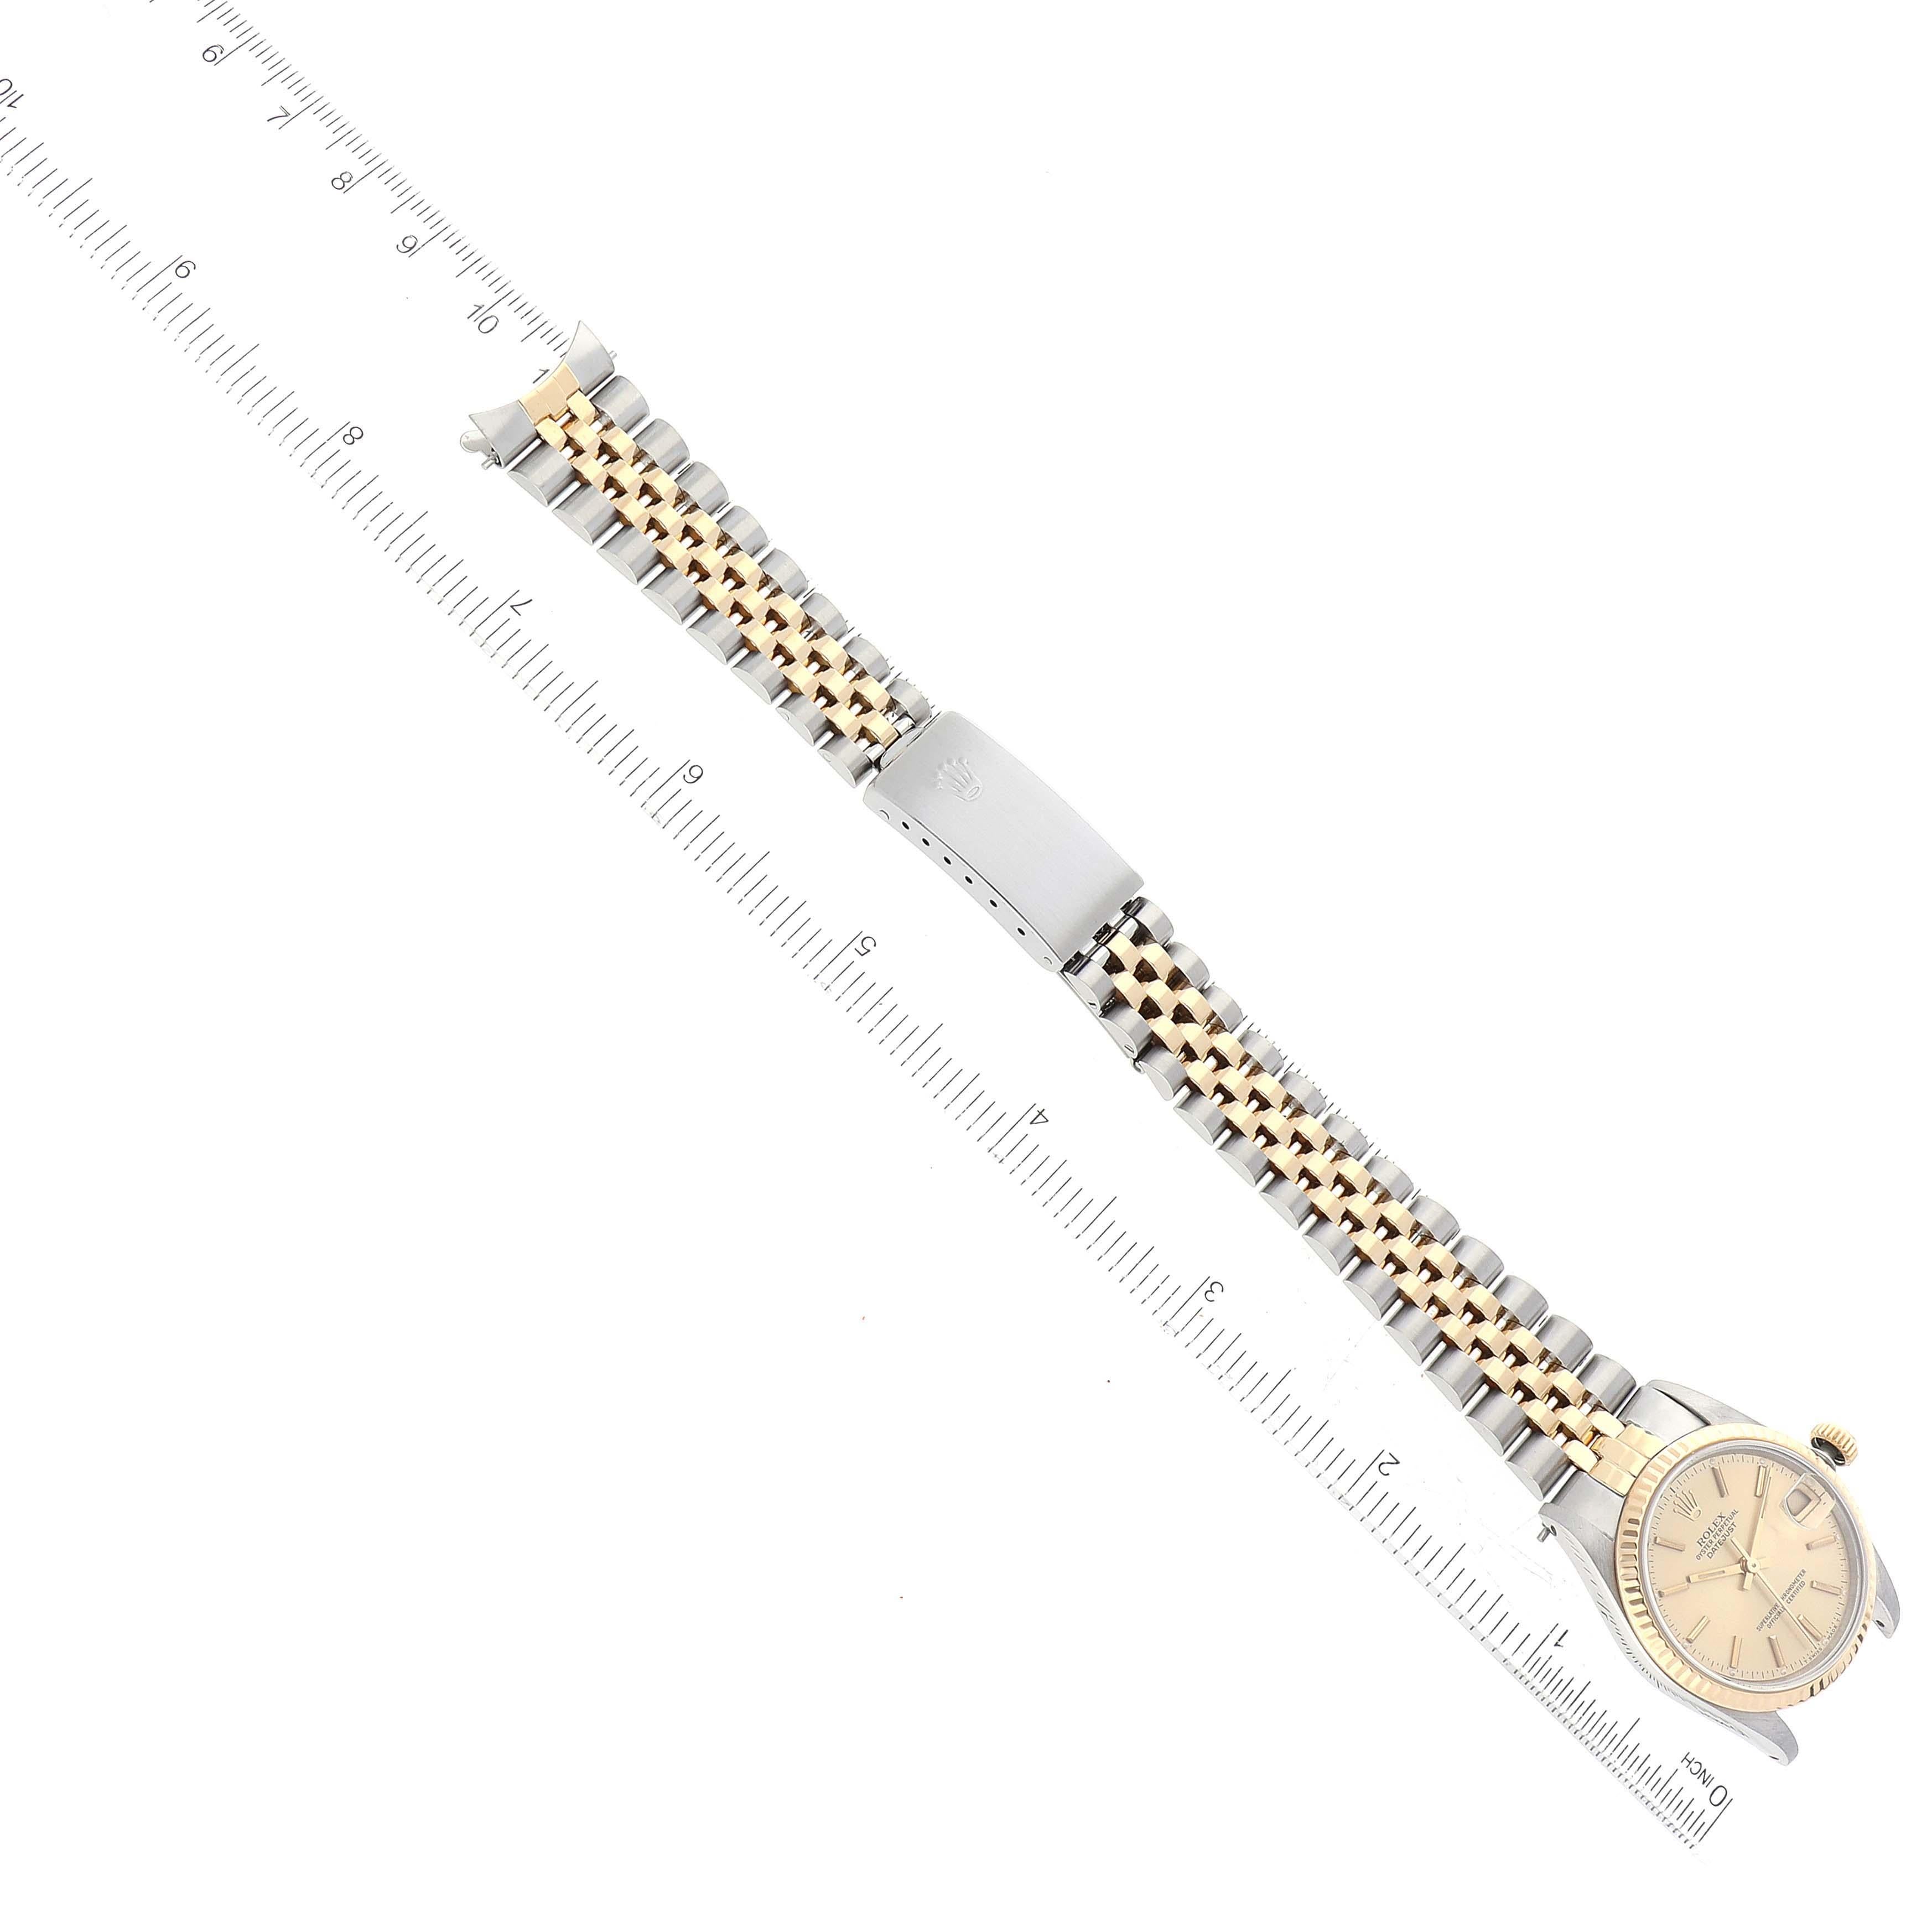 Rolex Datejust Midsize Steel Yellow Gold Ladies Watch 68273 Box Papers 6